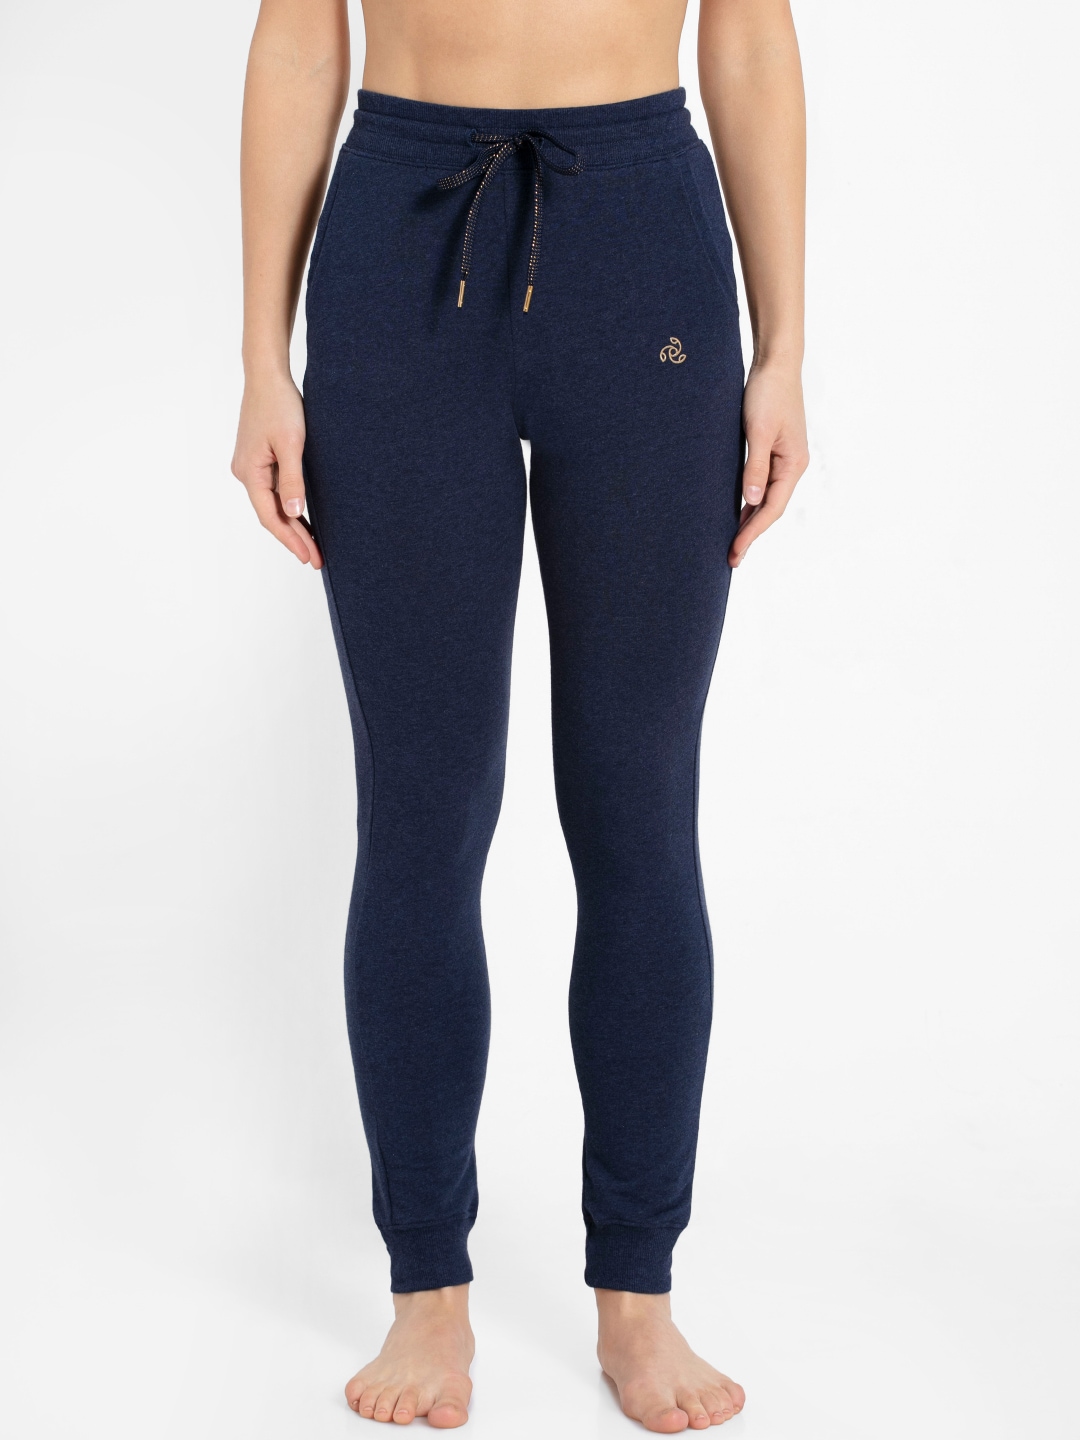 Jockey Women Navy Blue Solid Slim Fit Joggers Price in India